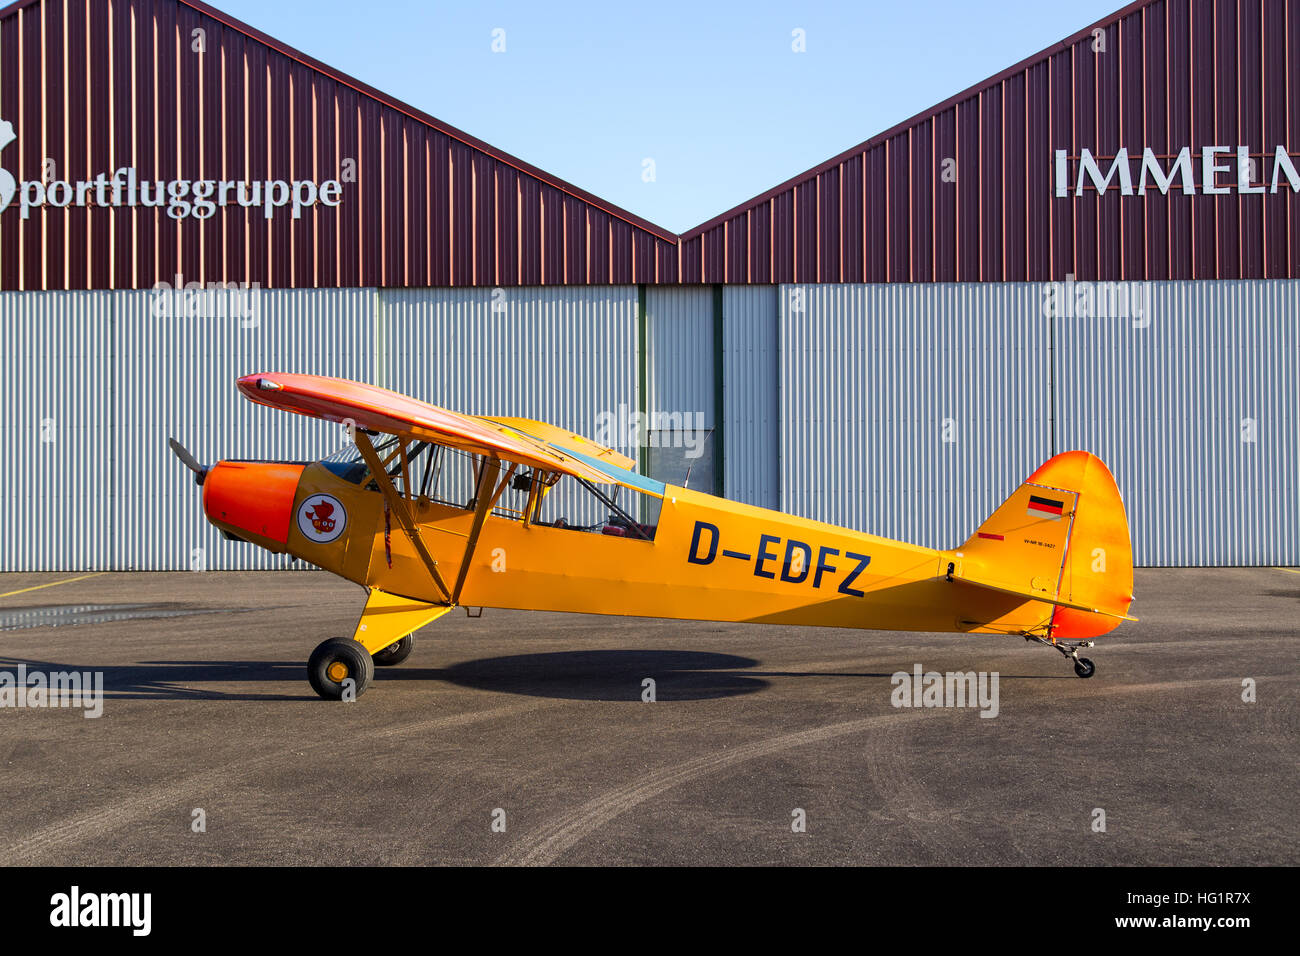 Bremgarten, Germany - October 22, 2016: A classic yellow Piper Cub aircraft parked at the airport Stock Photo